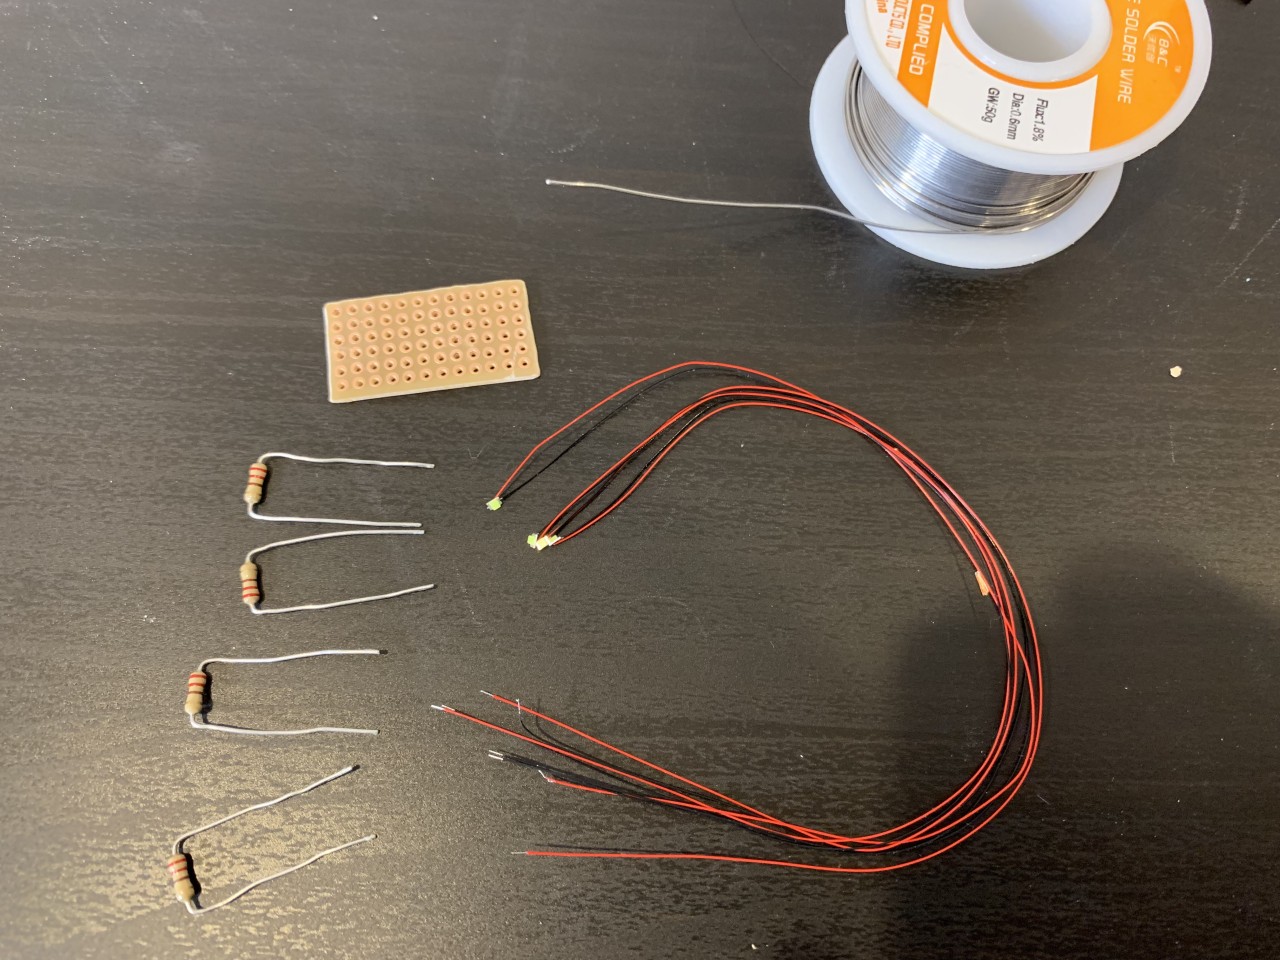 Parts for mounting LED resistors, but the protoboard was too thick